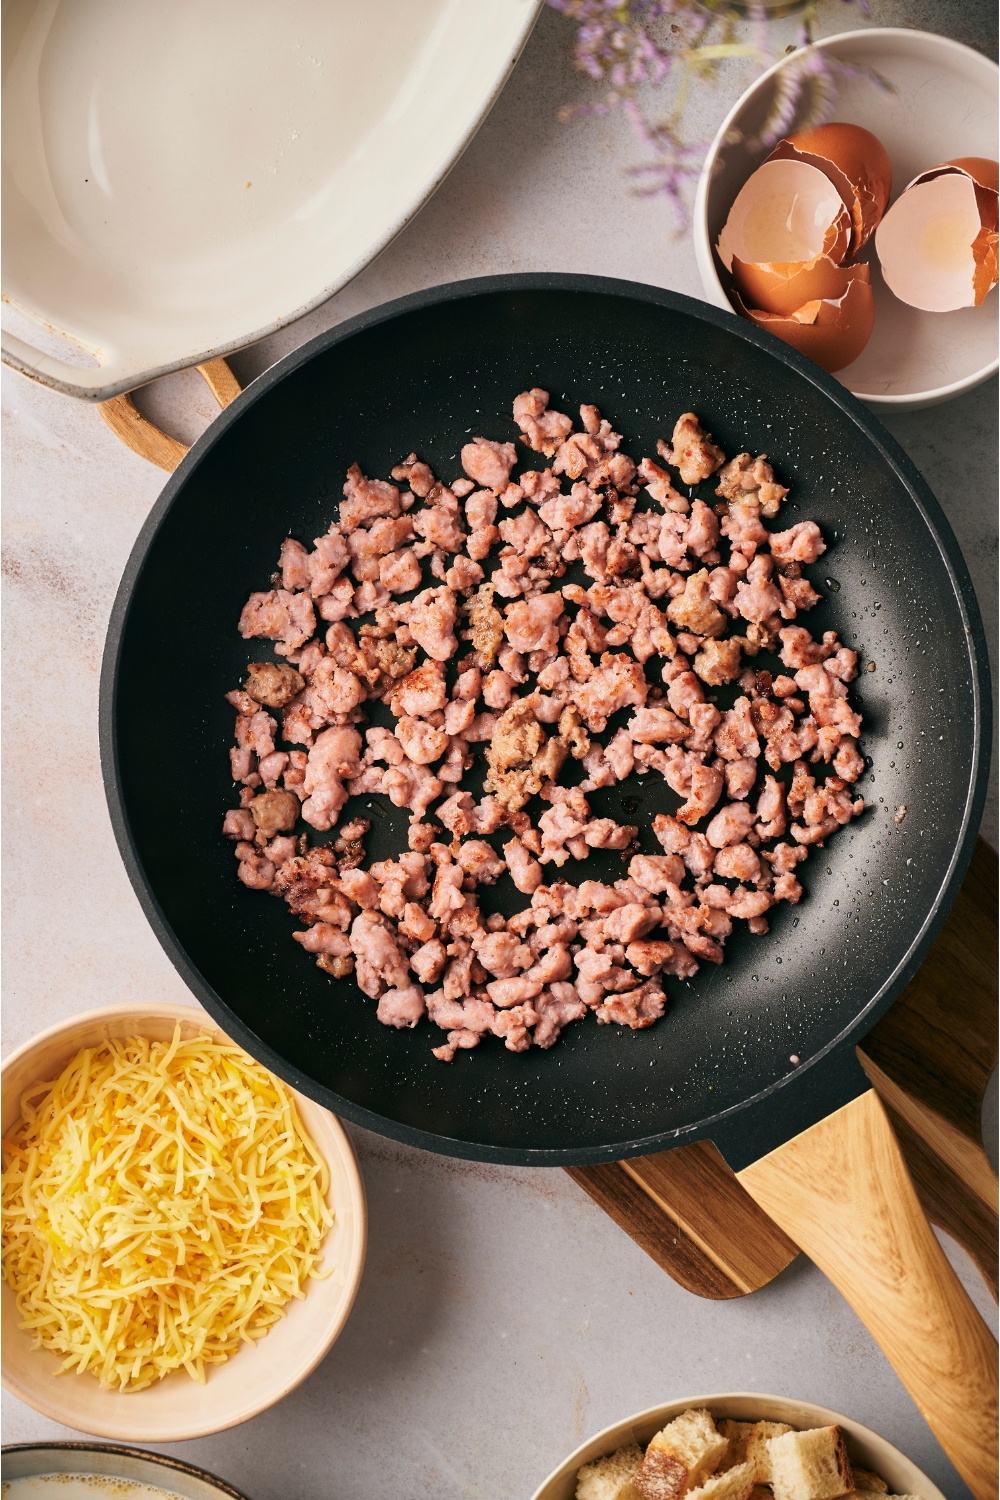 A black skillet with cooked sausage crumbles in the skillet.